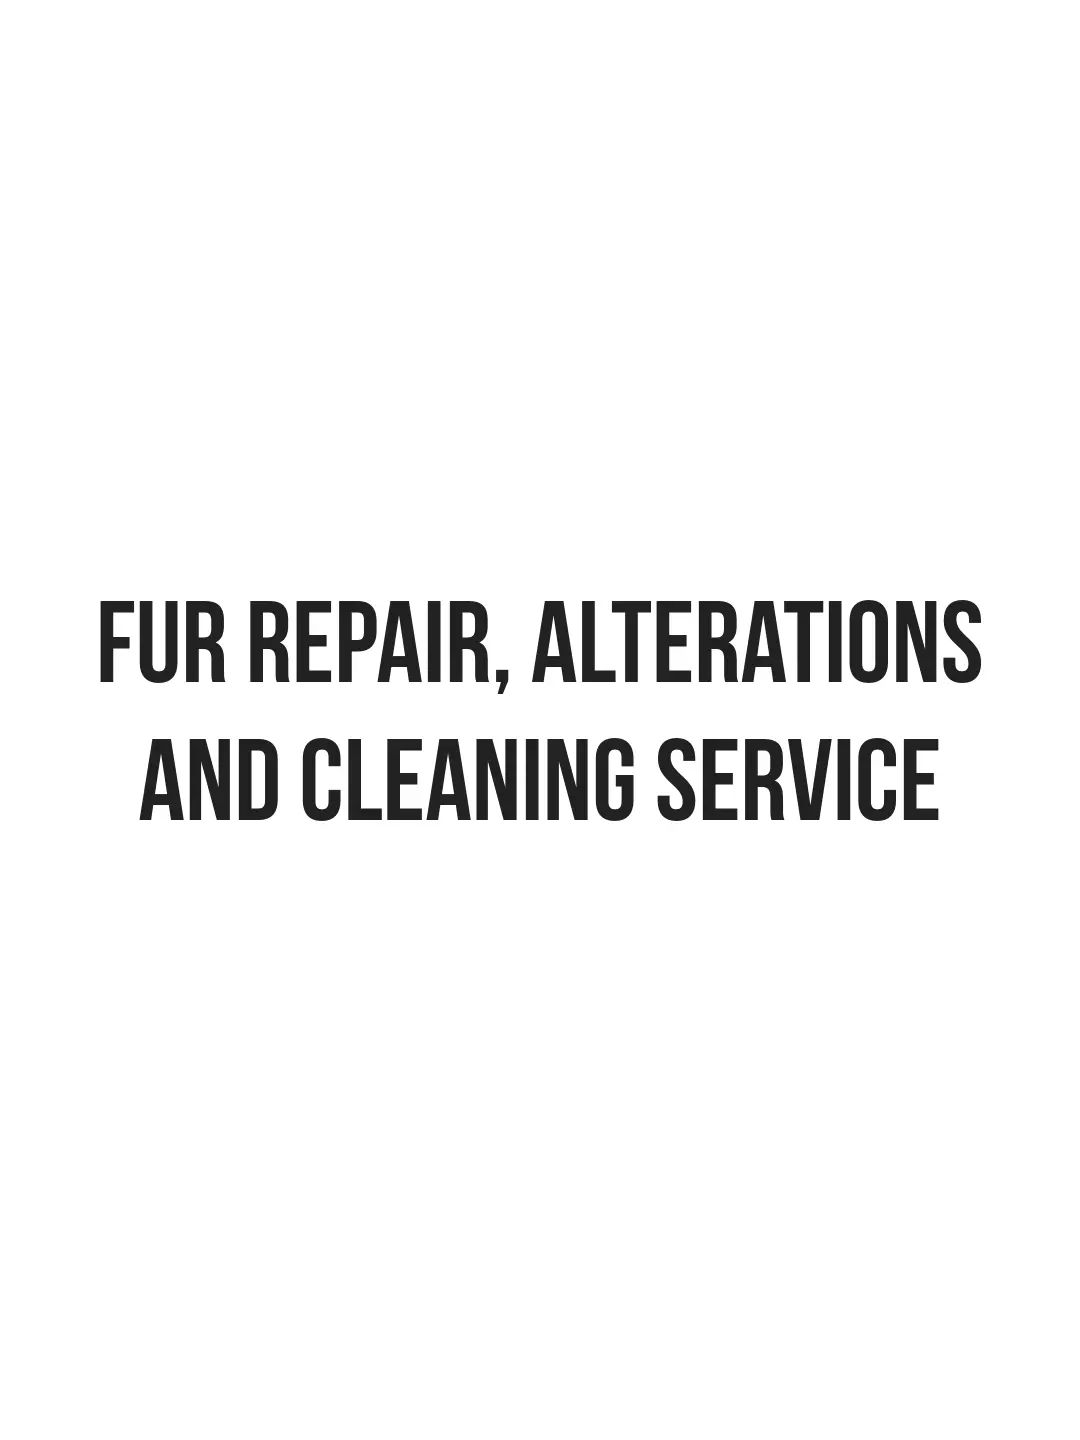 LaBelle Since 1919 Fur Repair, Alterations, and Cleaning Service